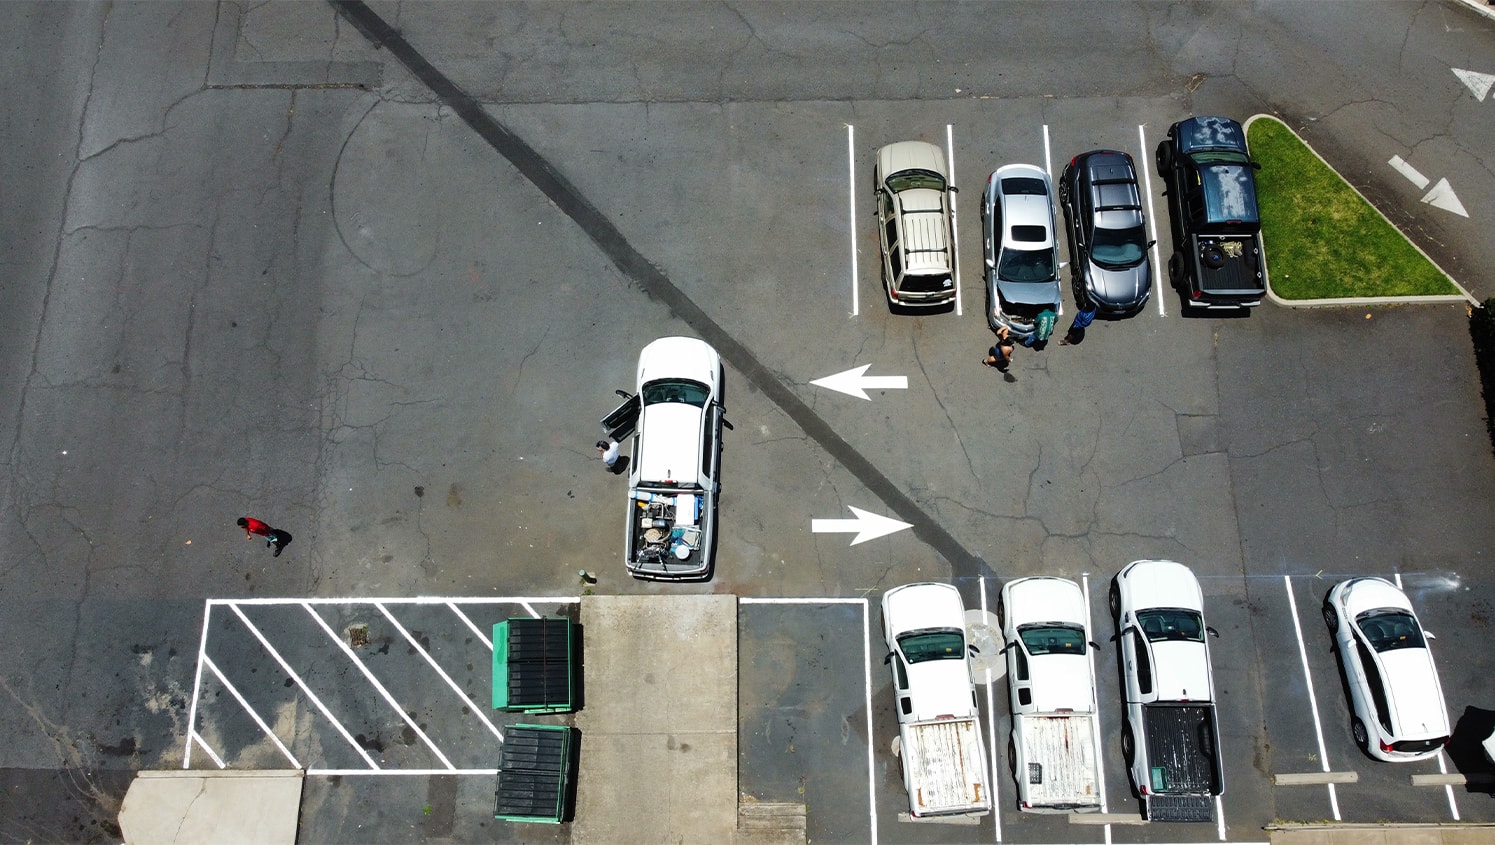 aerial view of O'Reilly Auto Parts parking lot with freshly painted parking spots